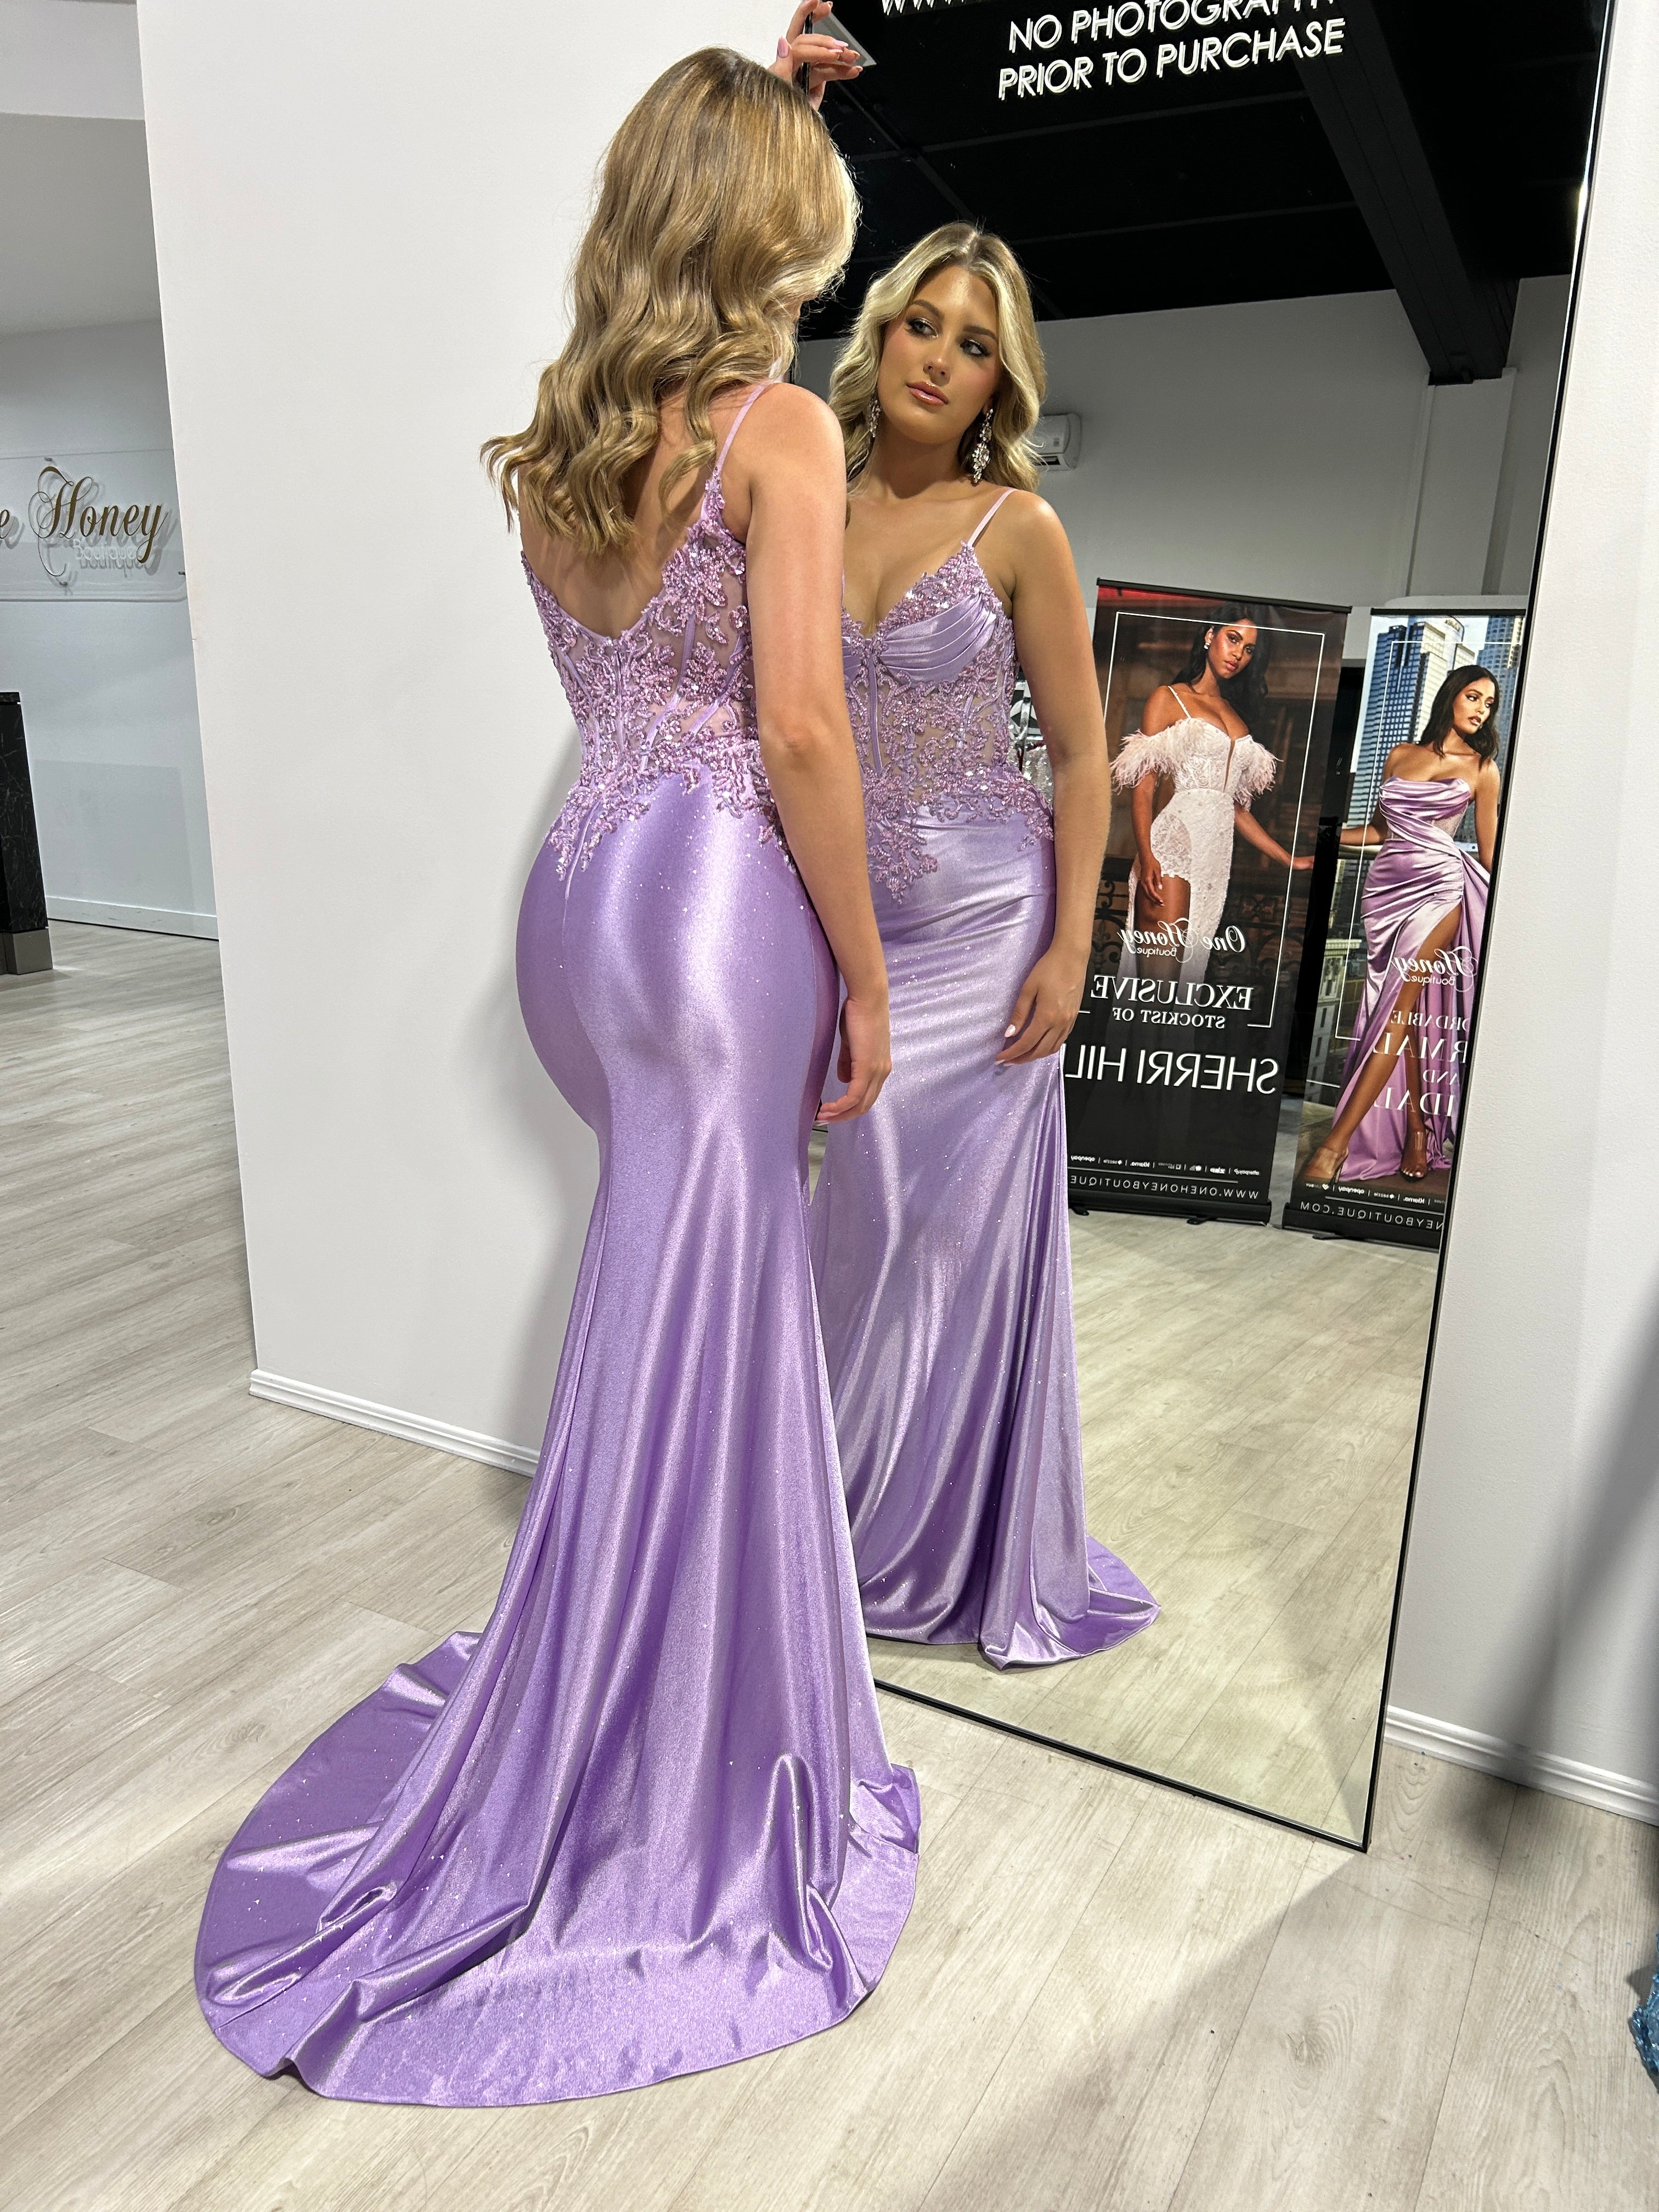 Honey Couture OLYMIA Lavender Embellished Stretch Glitter Satin Mermaid Formal Dress